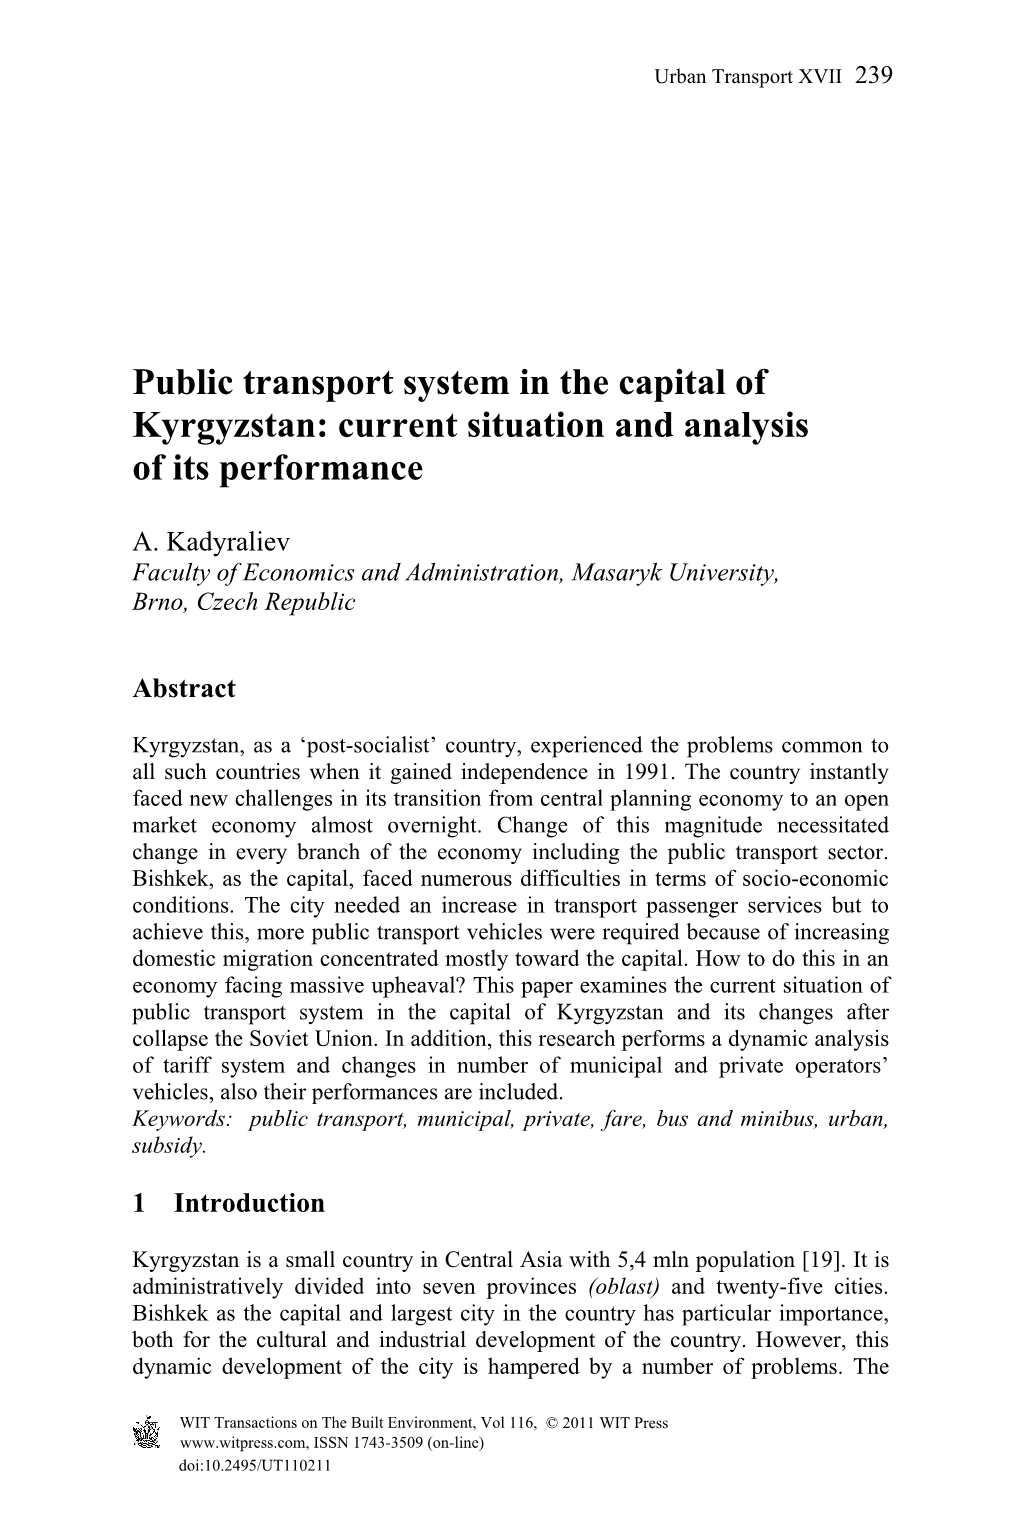 Public Transport System in the Capital of Kyrgyzstan: Current Situation and Analysis of Its Performance